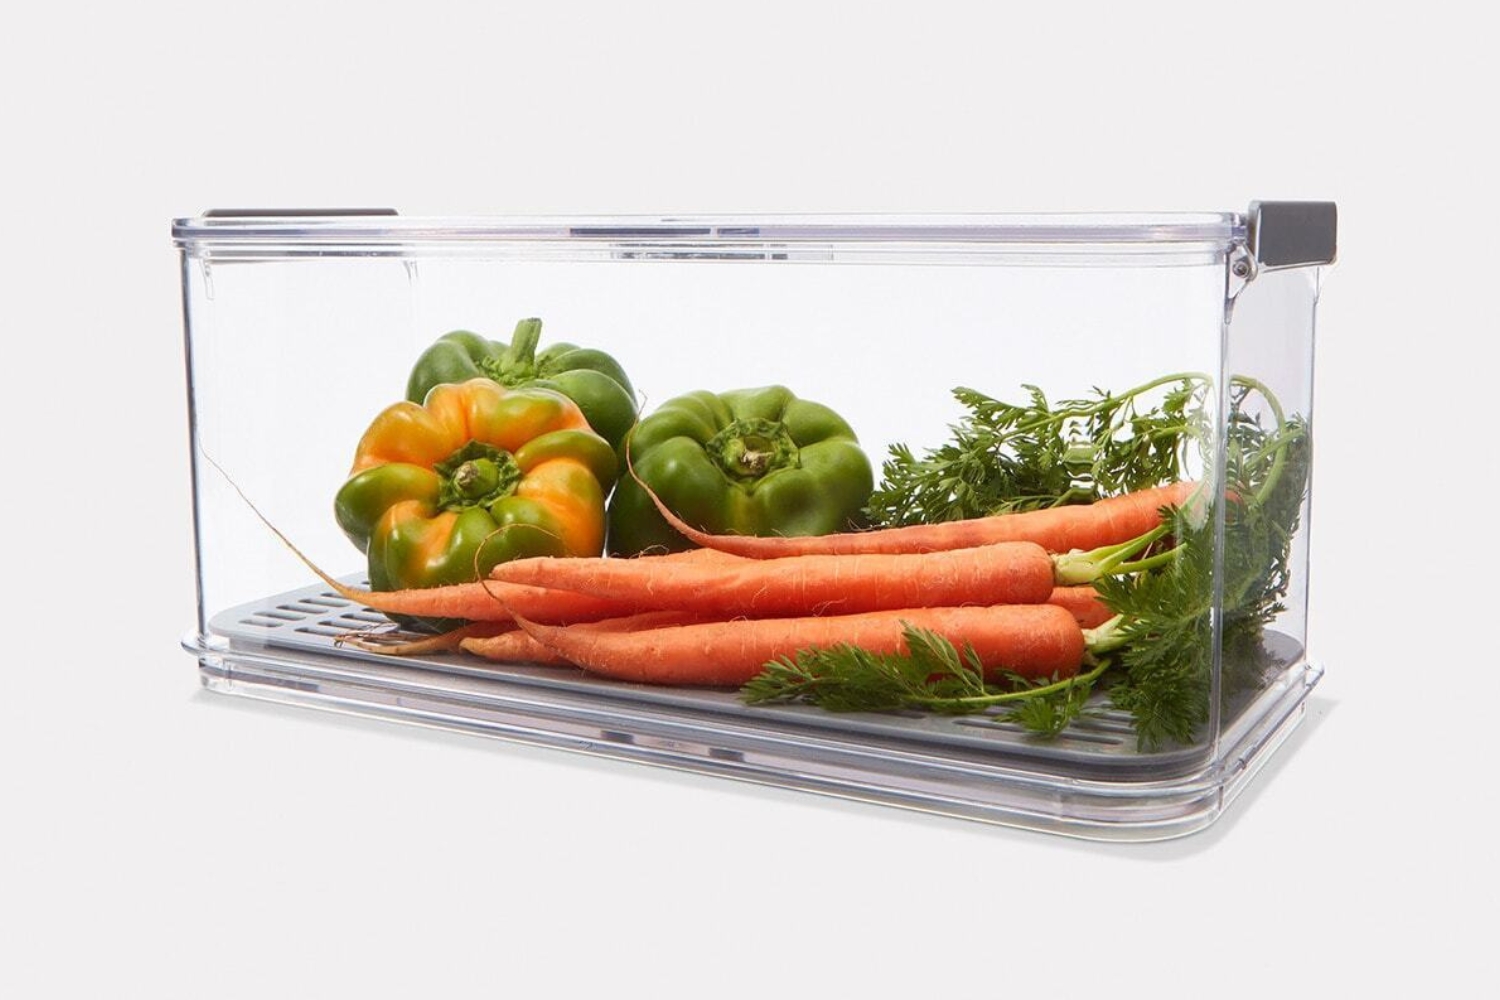 Find out why these $12 Kmart storage containers are going viral